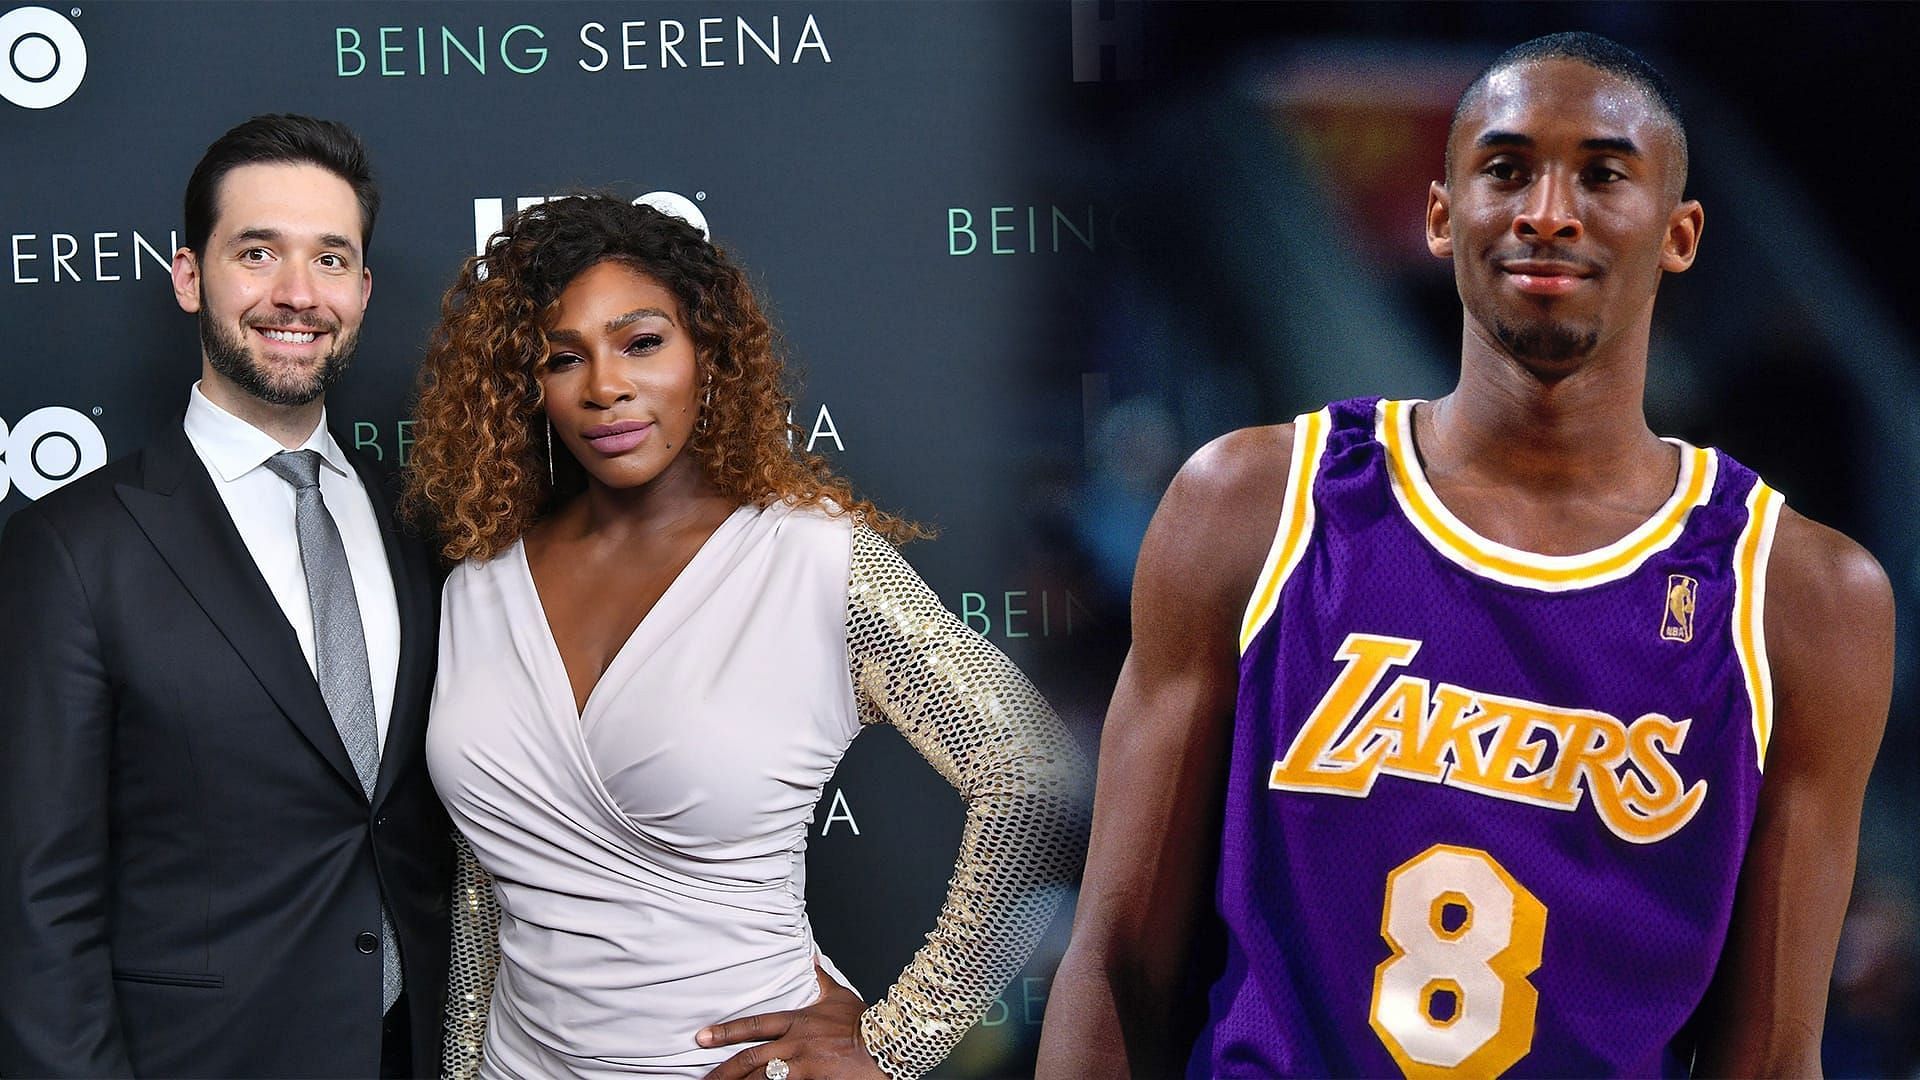 Alexis Ohanian with wife Serena Williams [left] and on right - Kobe Bryant.